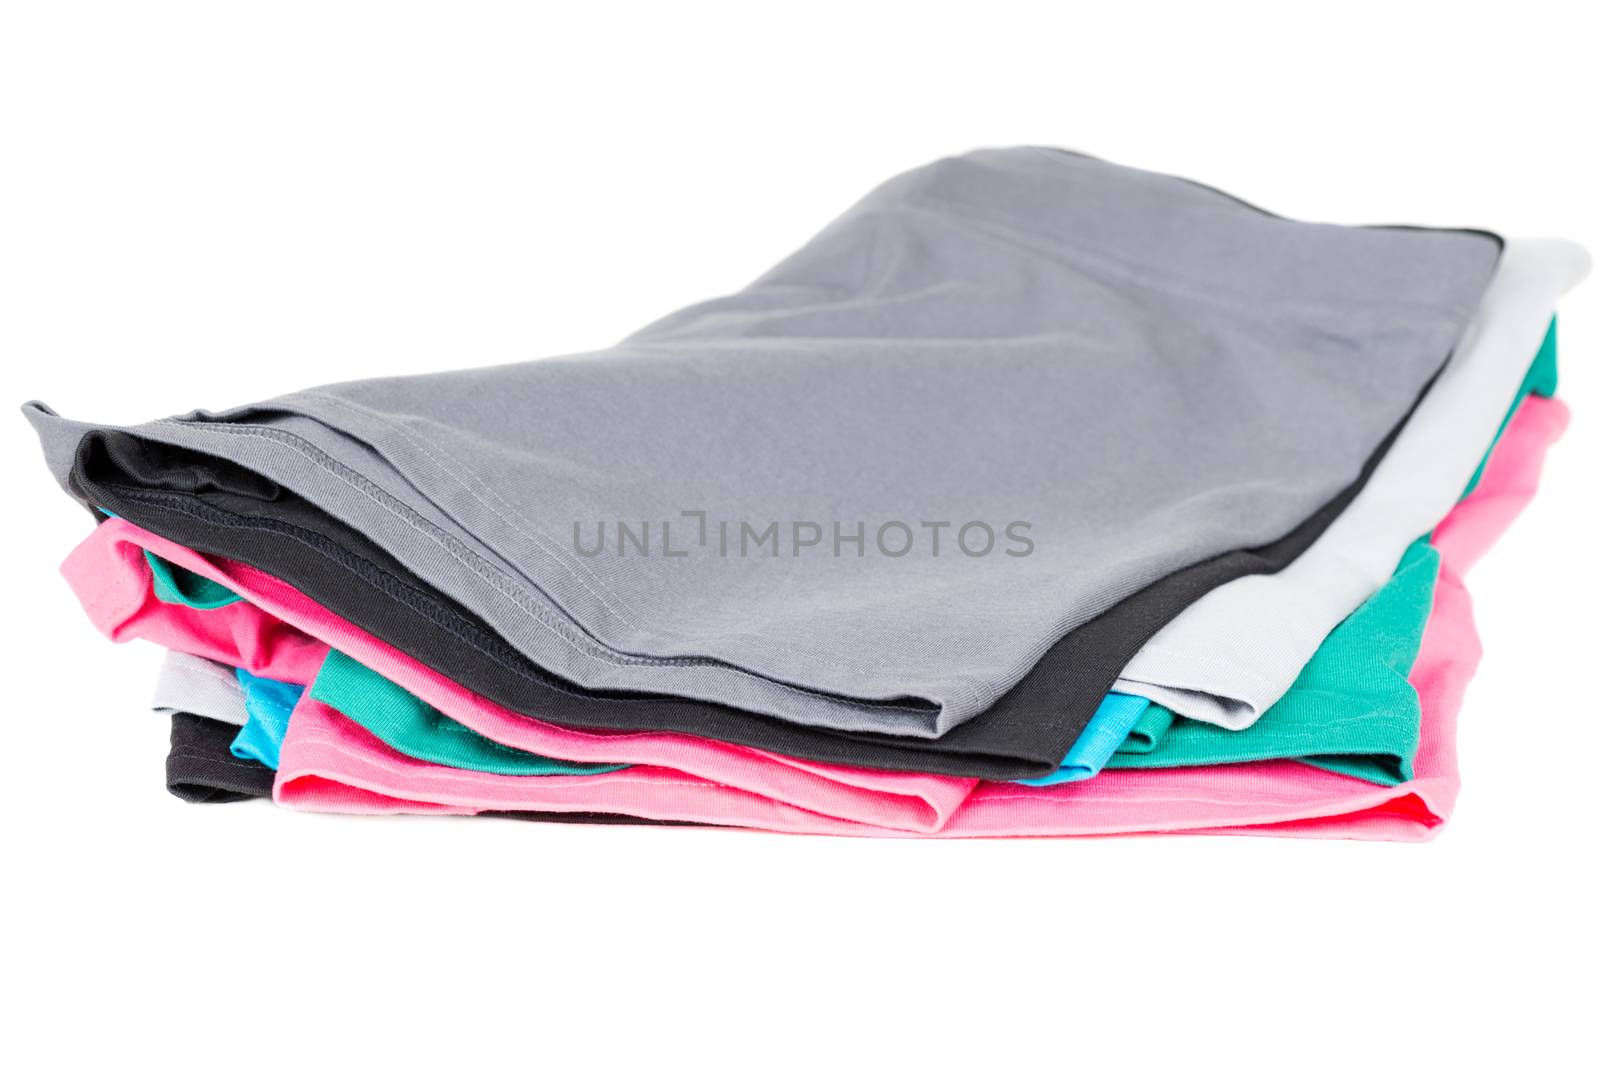 Colourful men's Boxer briefs isolated on a white background